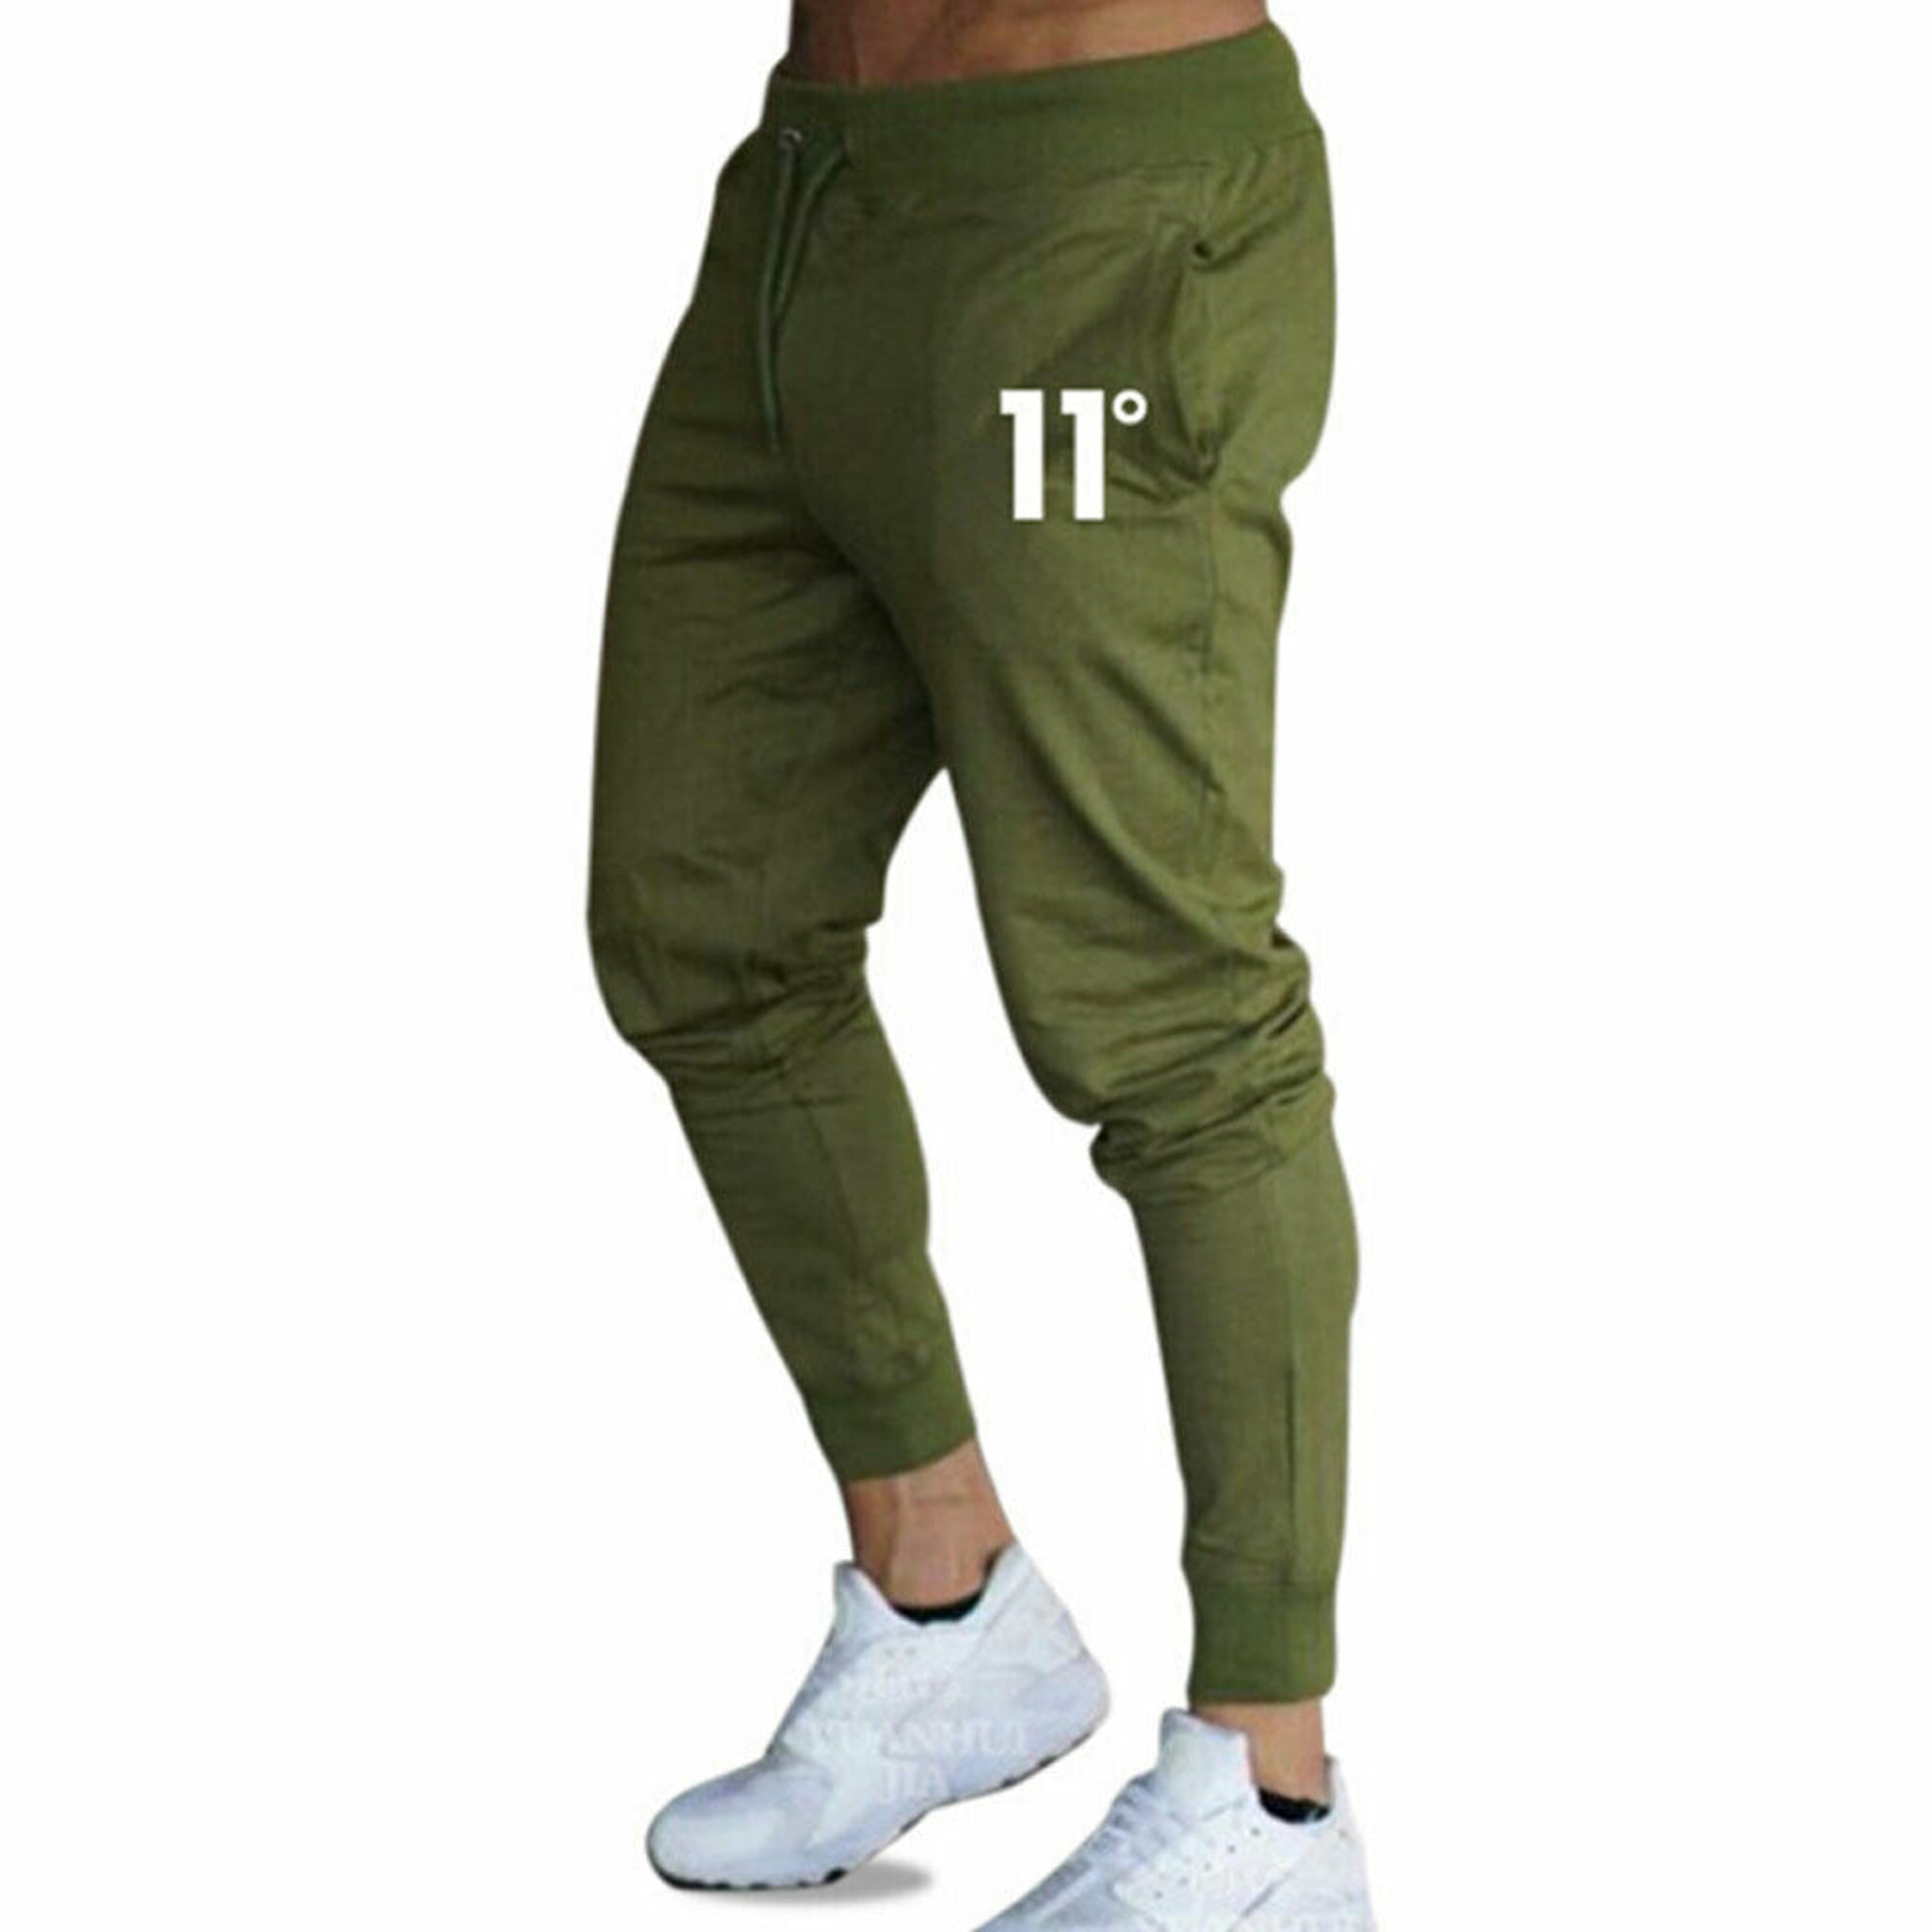 Mens Gym Slim Fitness Trousers Tracksuit Bottoms Skinny Jogger Sweat Wear Pants